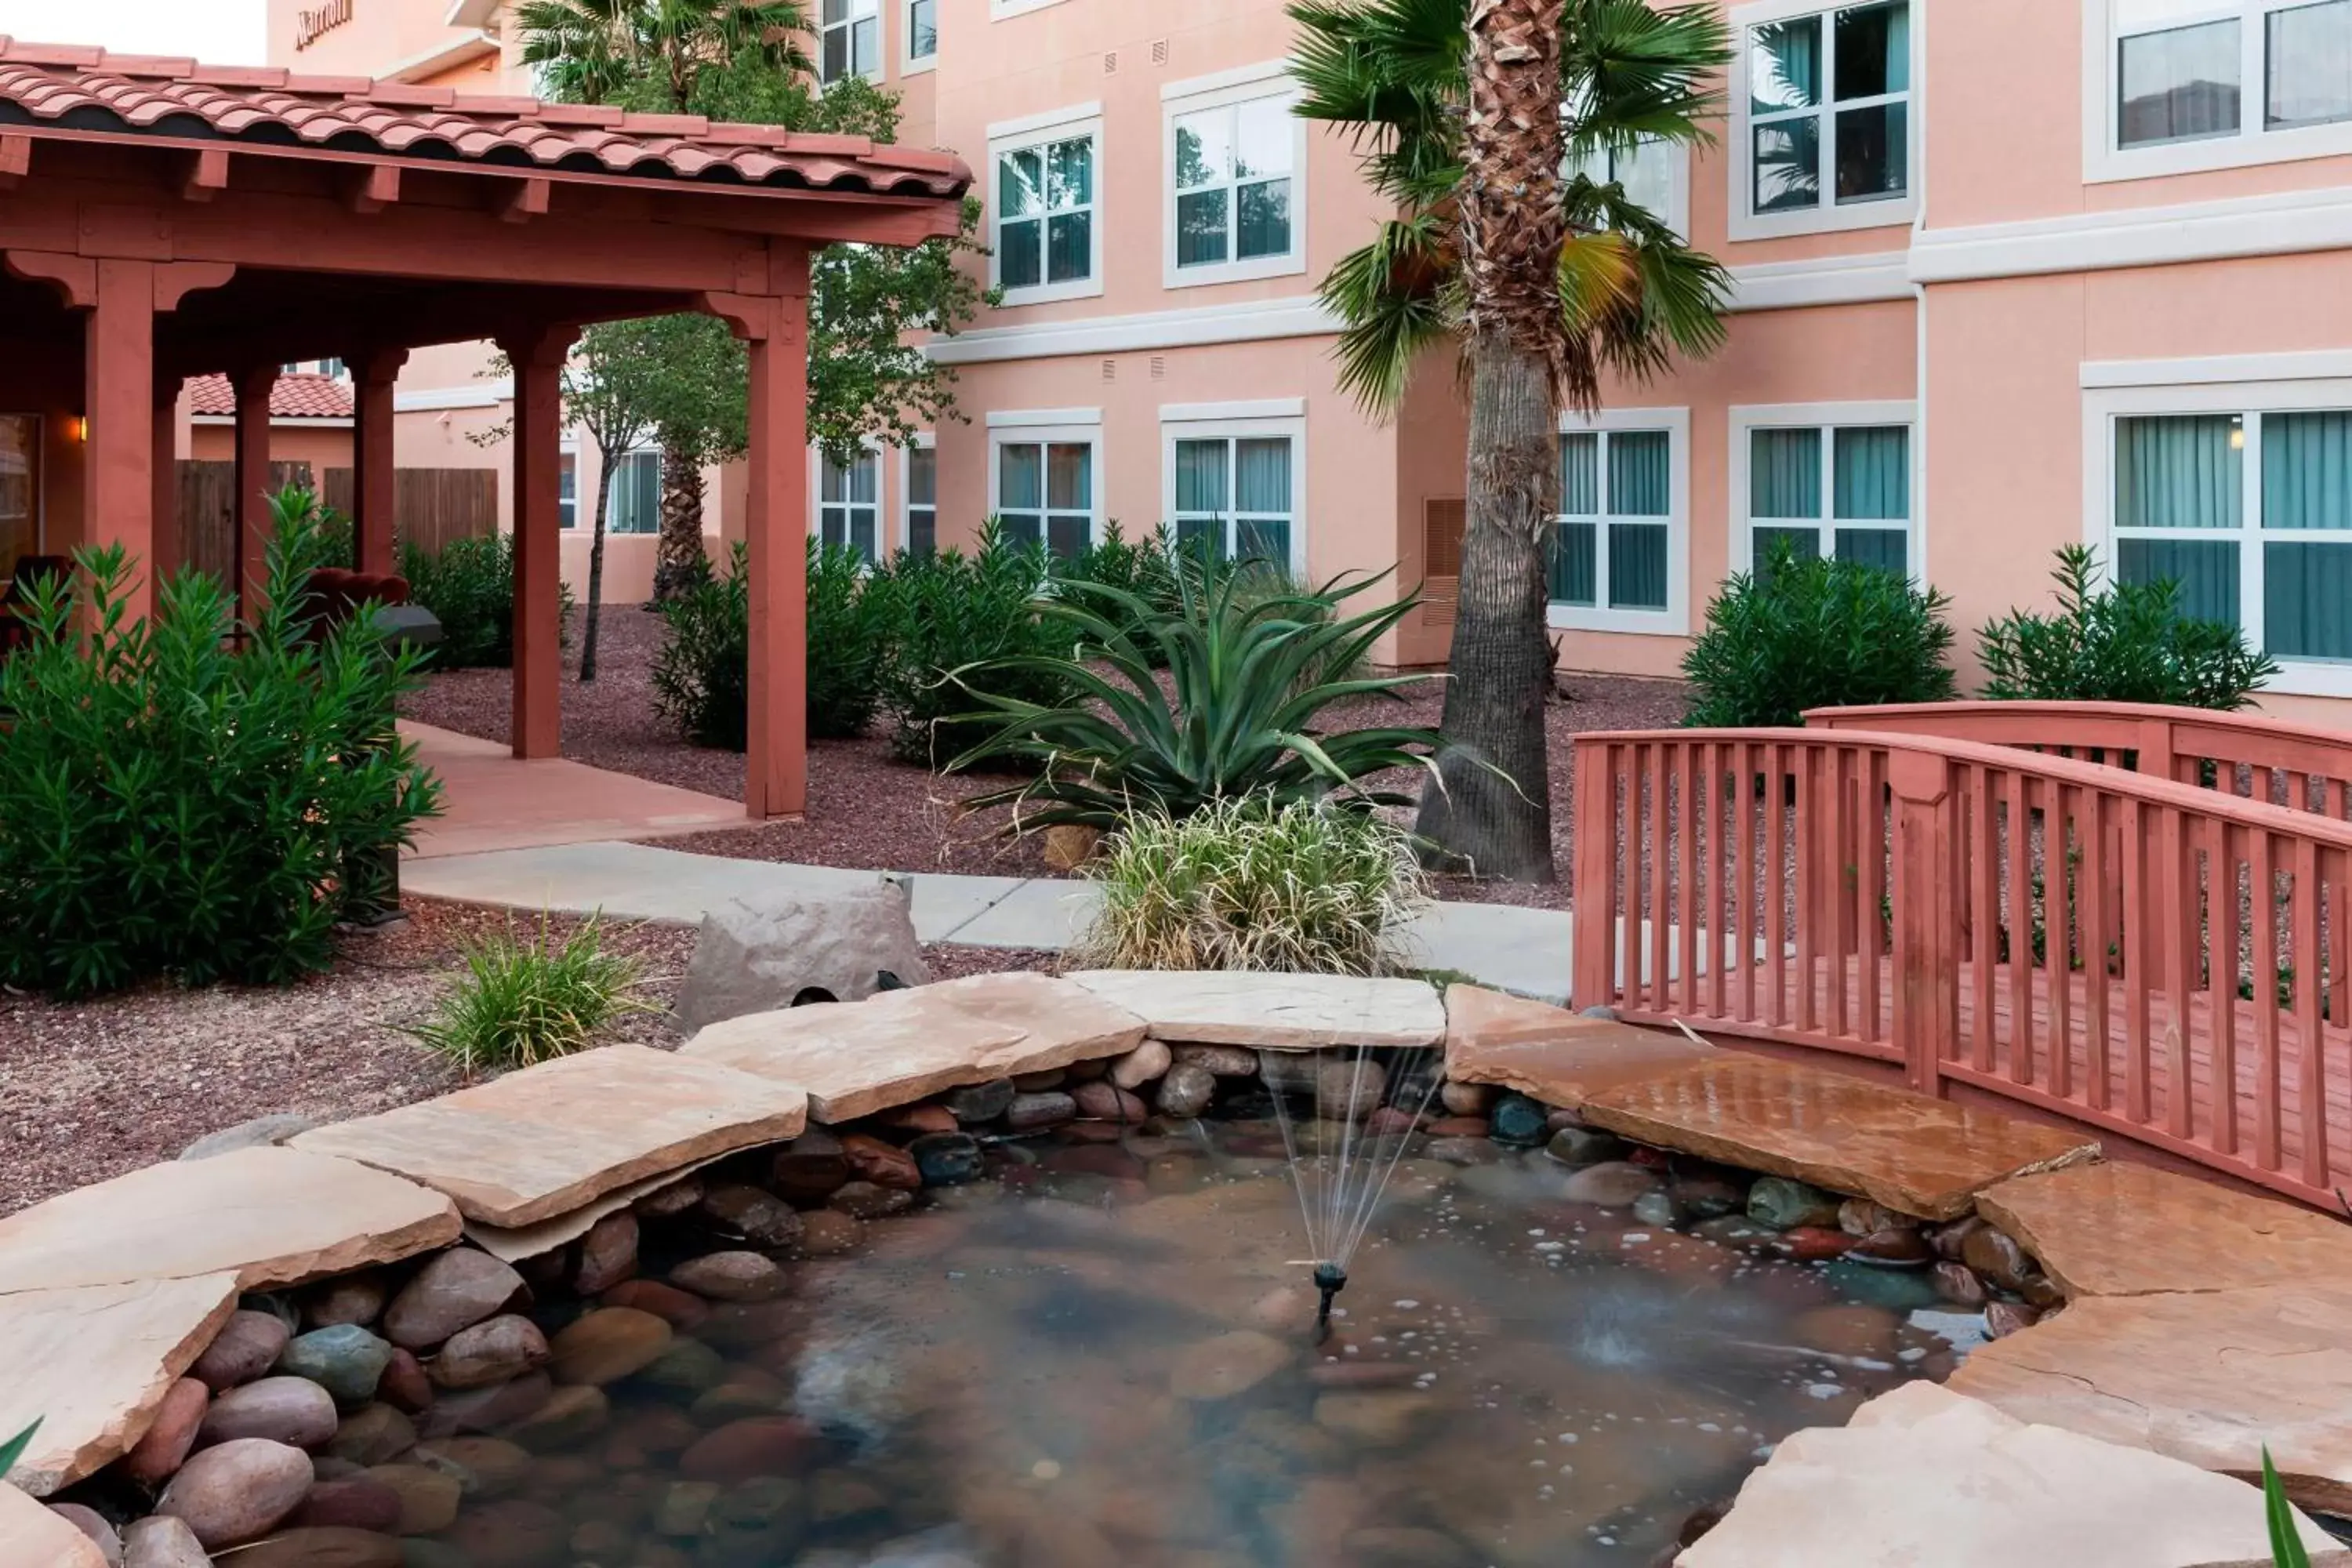 Property building in Residence Inn Tucson Airport